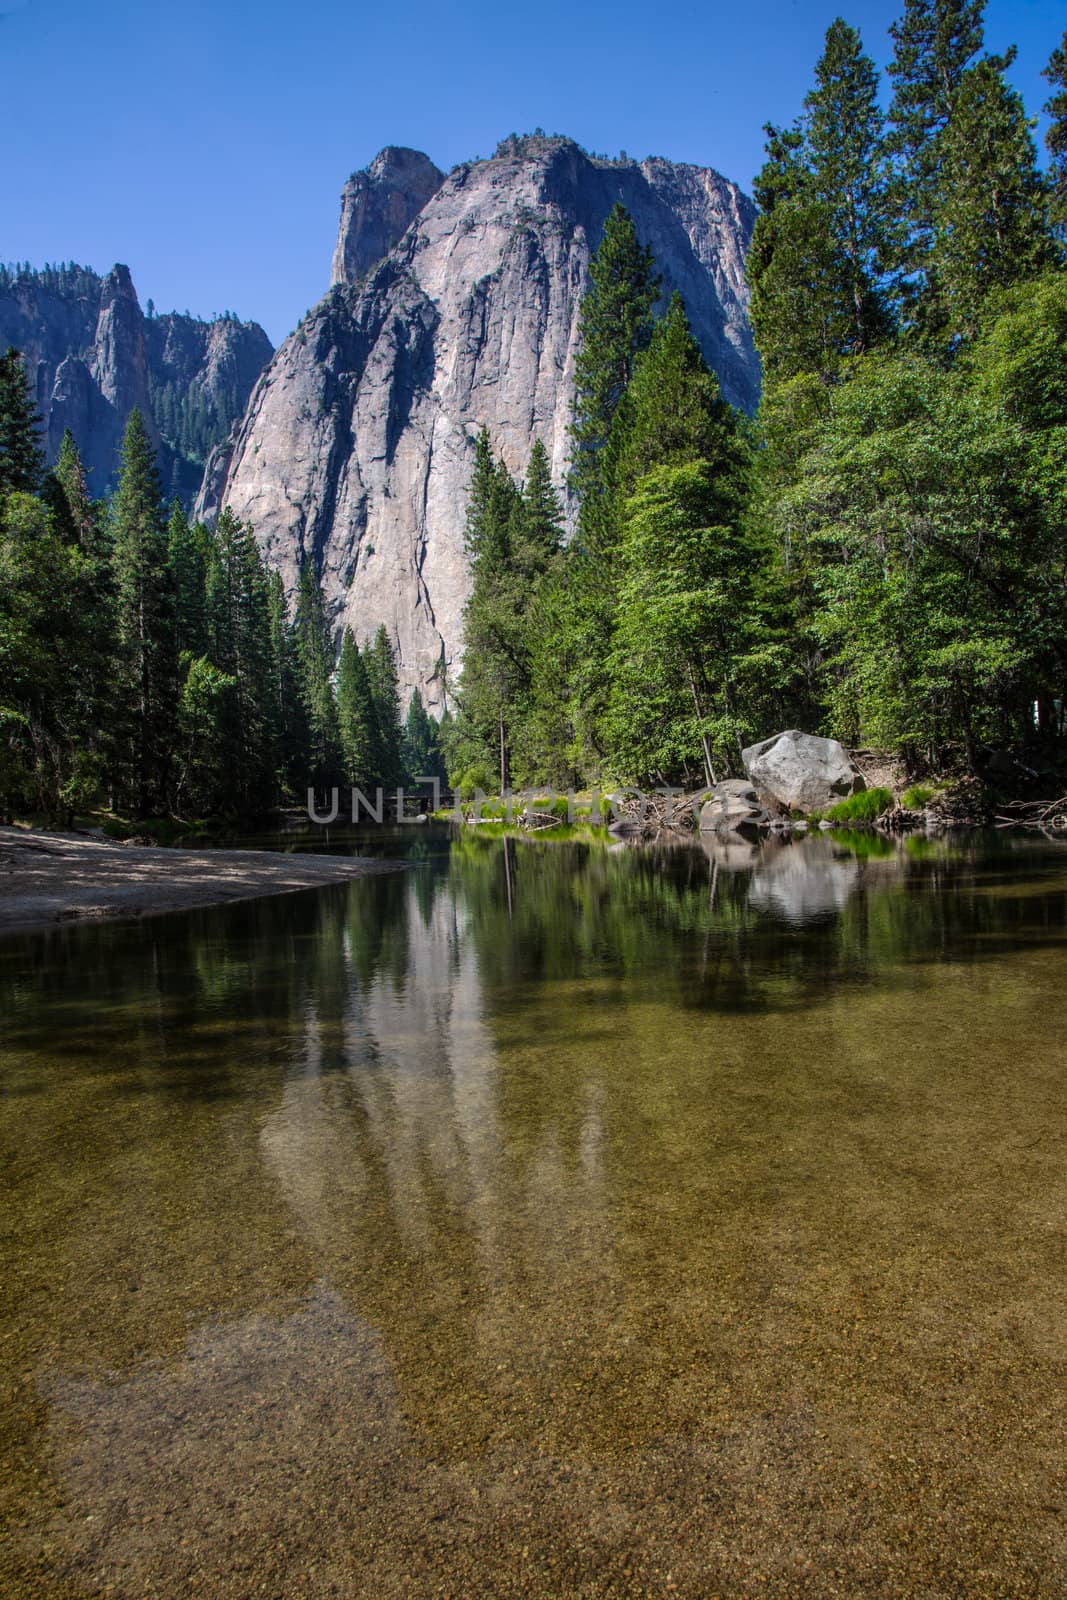 image of yosemite national park with a large granite cliff surrounded by trees and a river at the bottom of the image